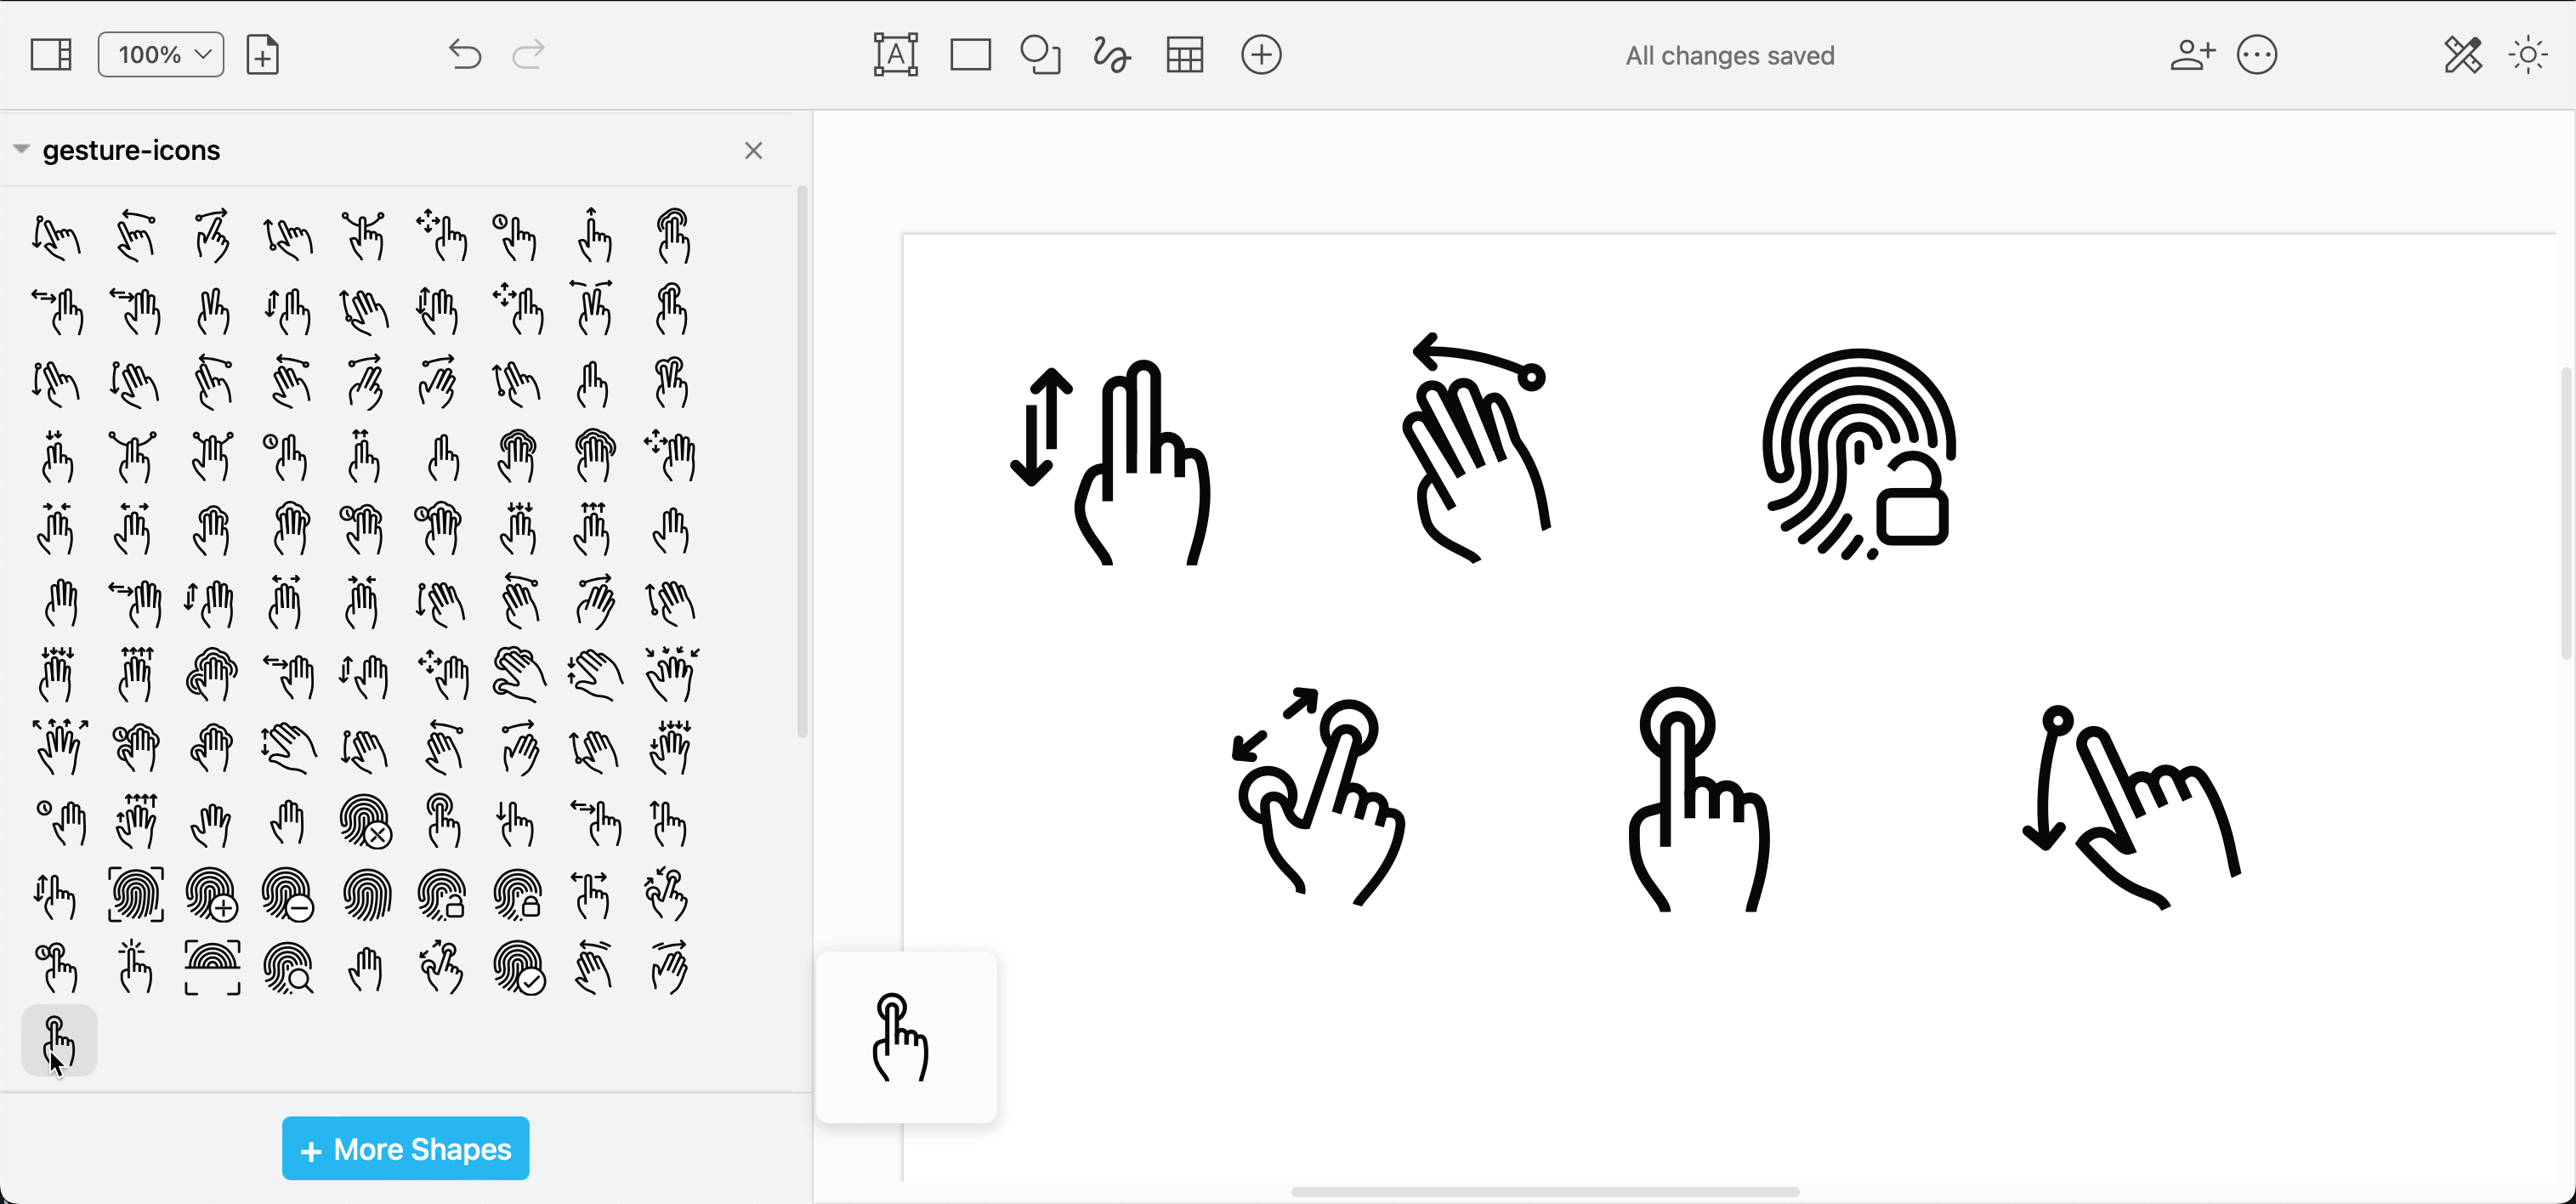 Open the gesture icons custom shape library in diagrams.net from the drawio-libs Github repository